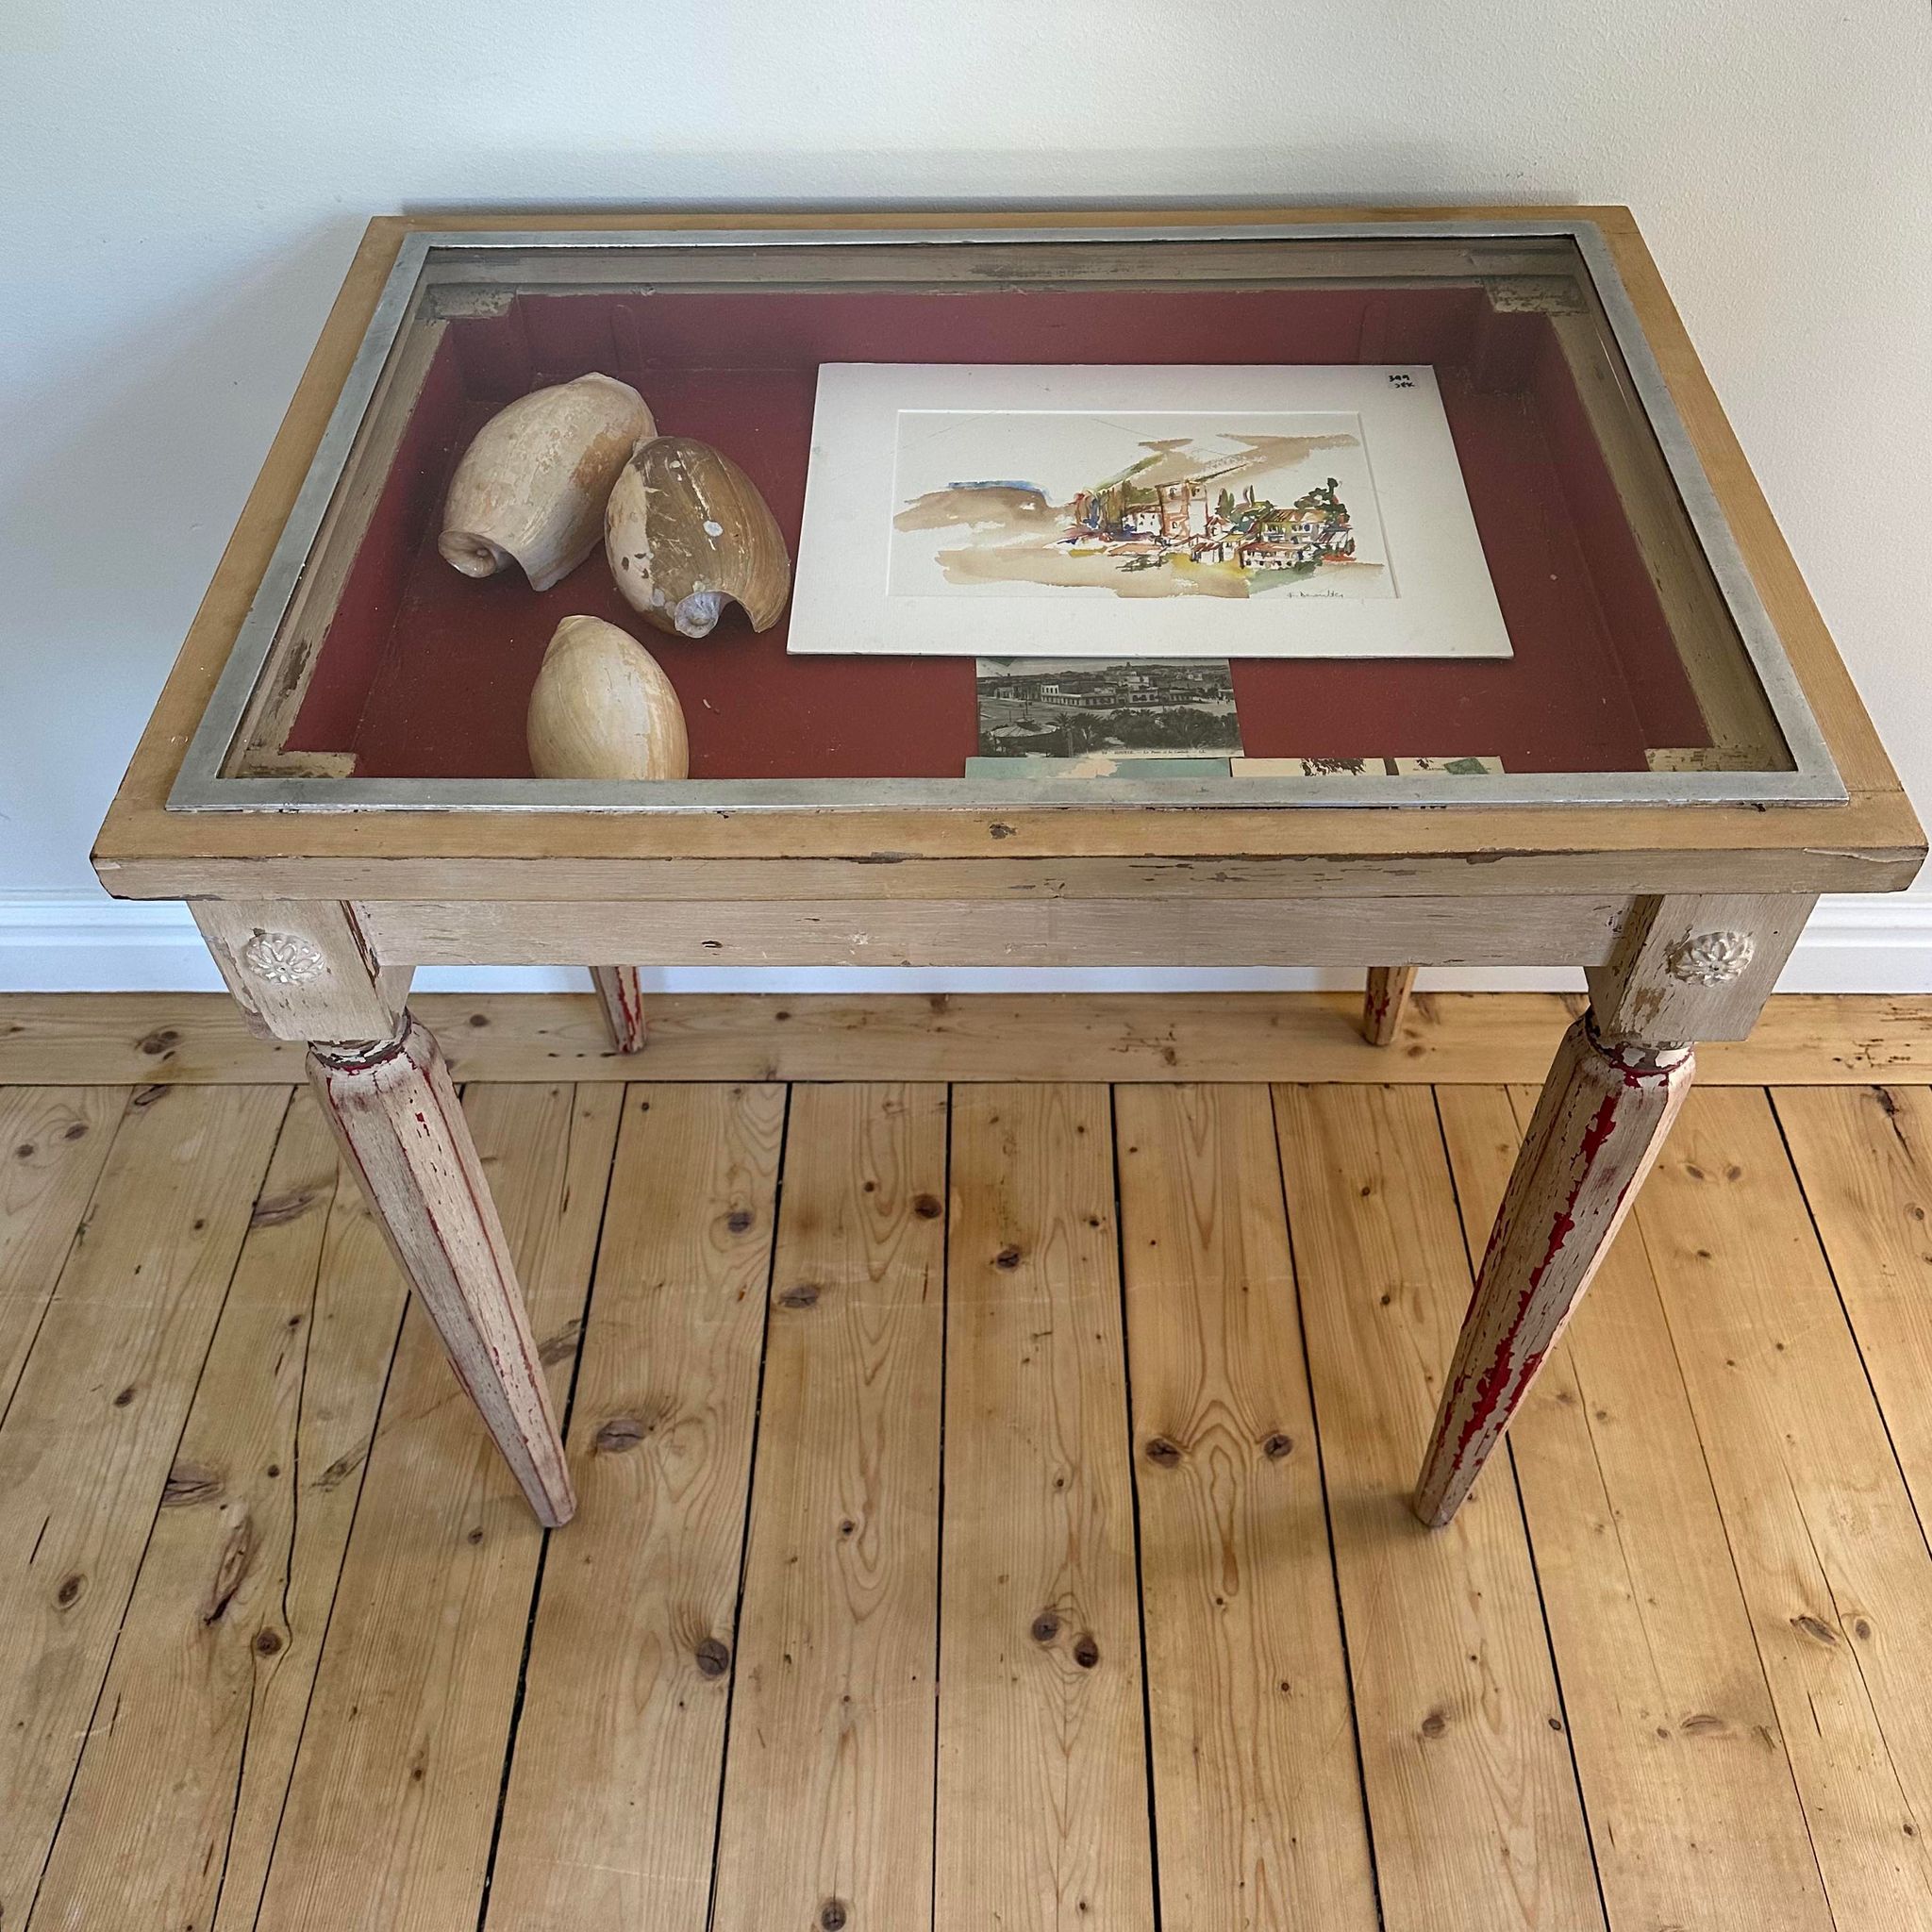 Old display table